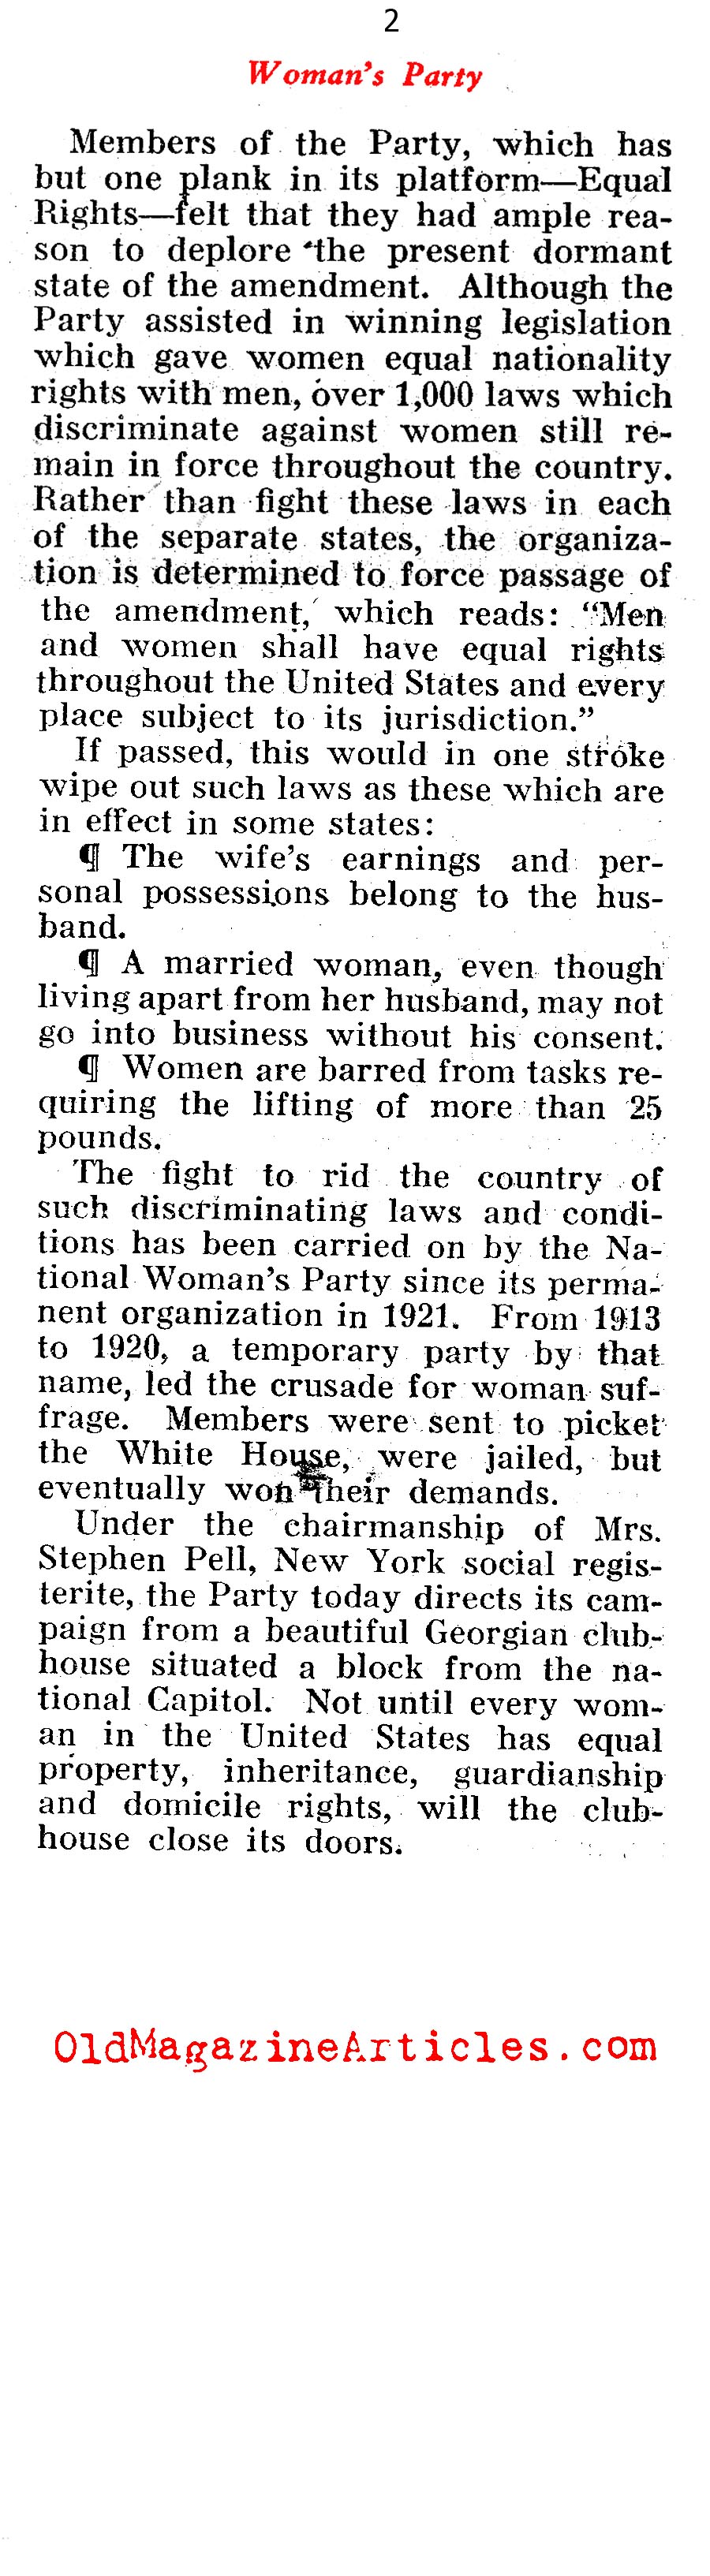 ''The Equal Rights Amendment'' Voted Down (Pathfinder Magazine, 1937)